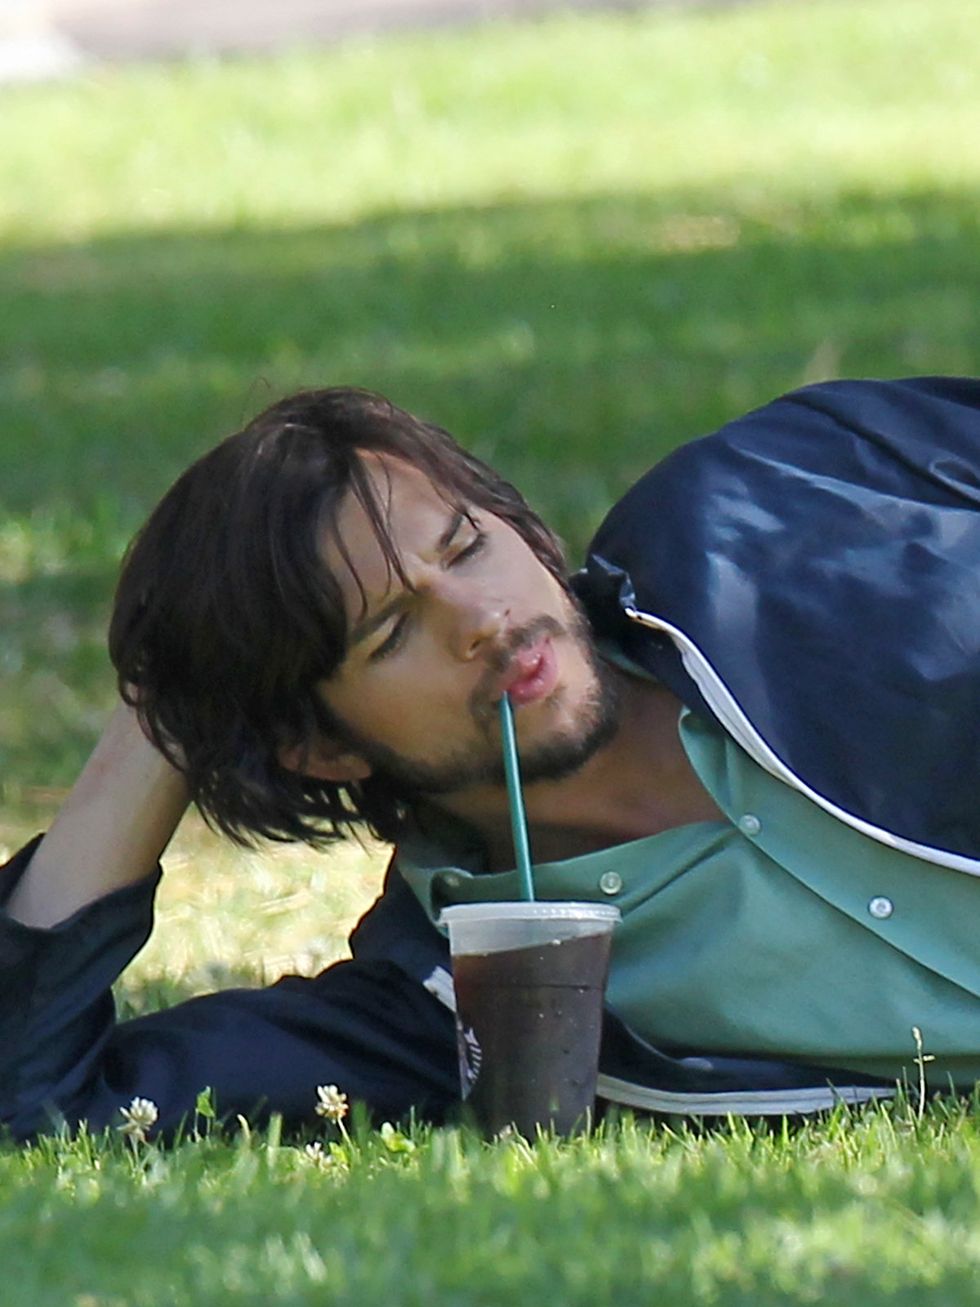 Grass, Drink, People in nature, Black hair, Drinking, Long hair, Lawn, Meadow, Non-alcoholic beverage, Cup, 